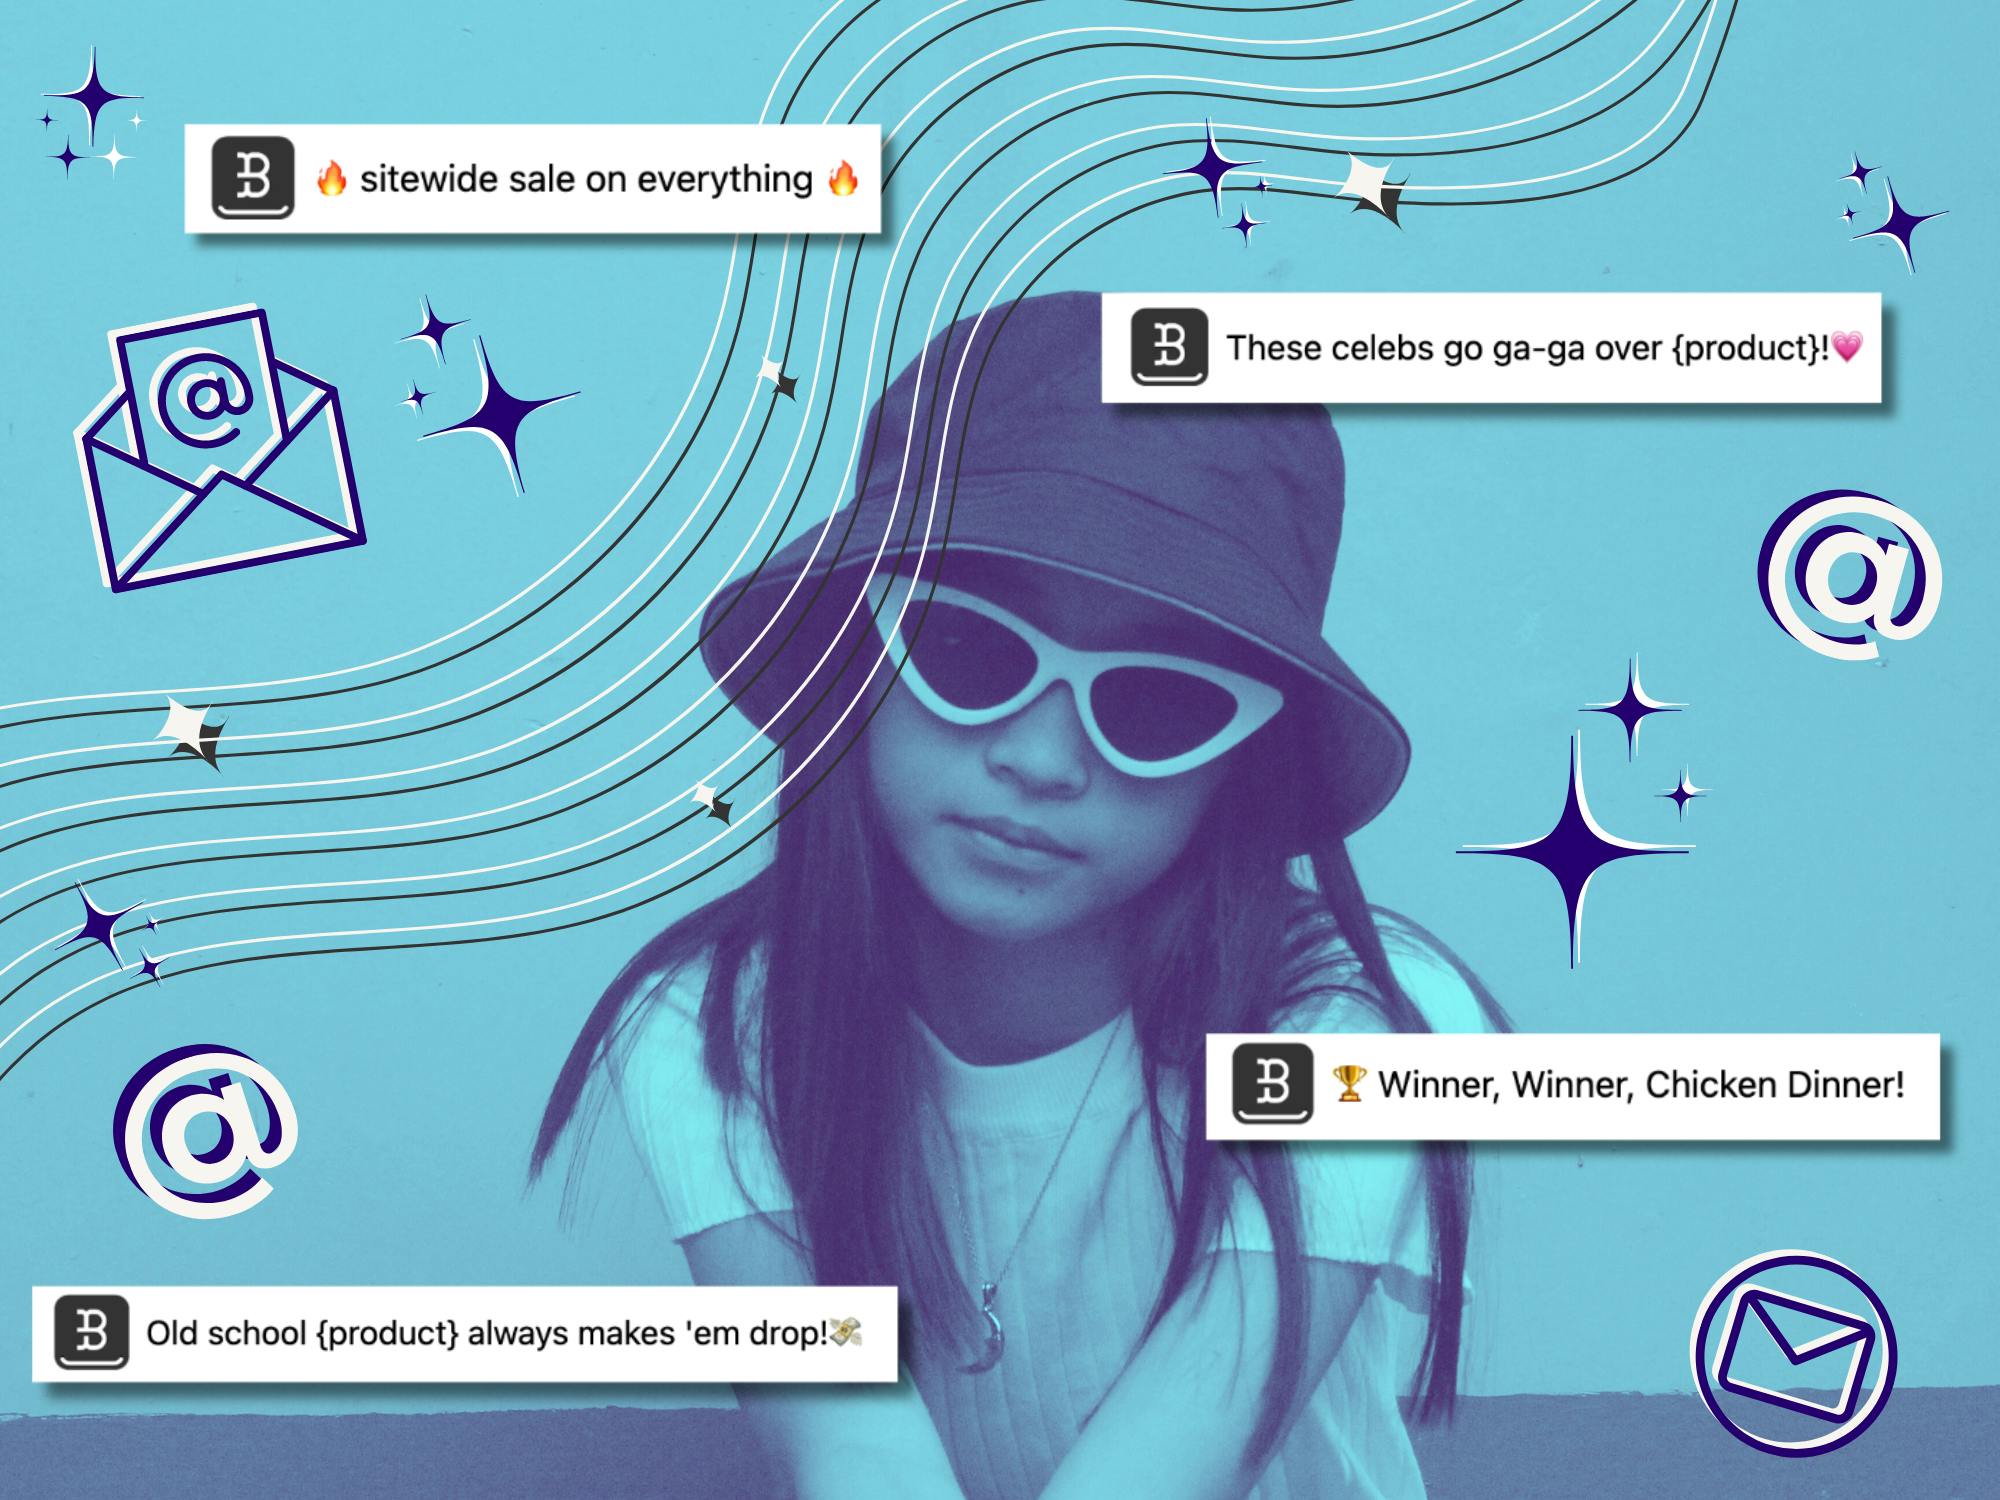 examples of the best email subjects that appeal to gen z